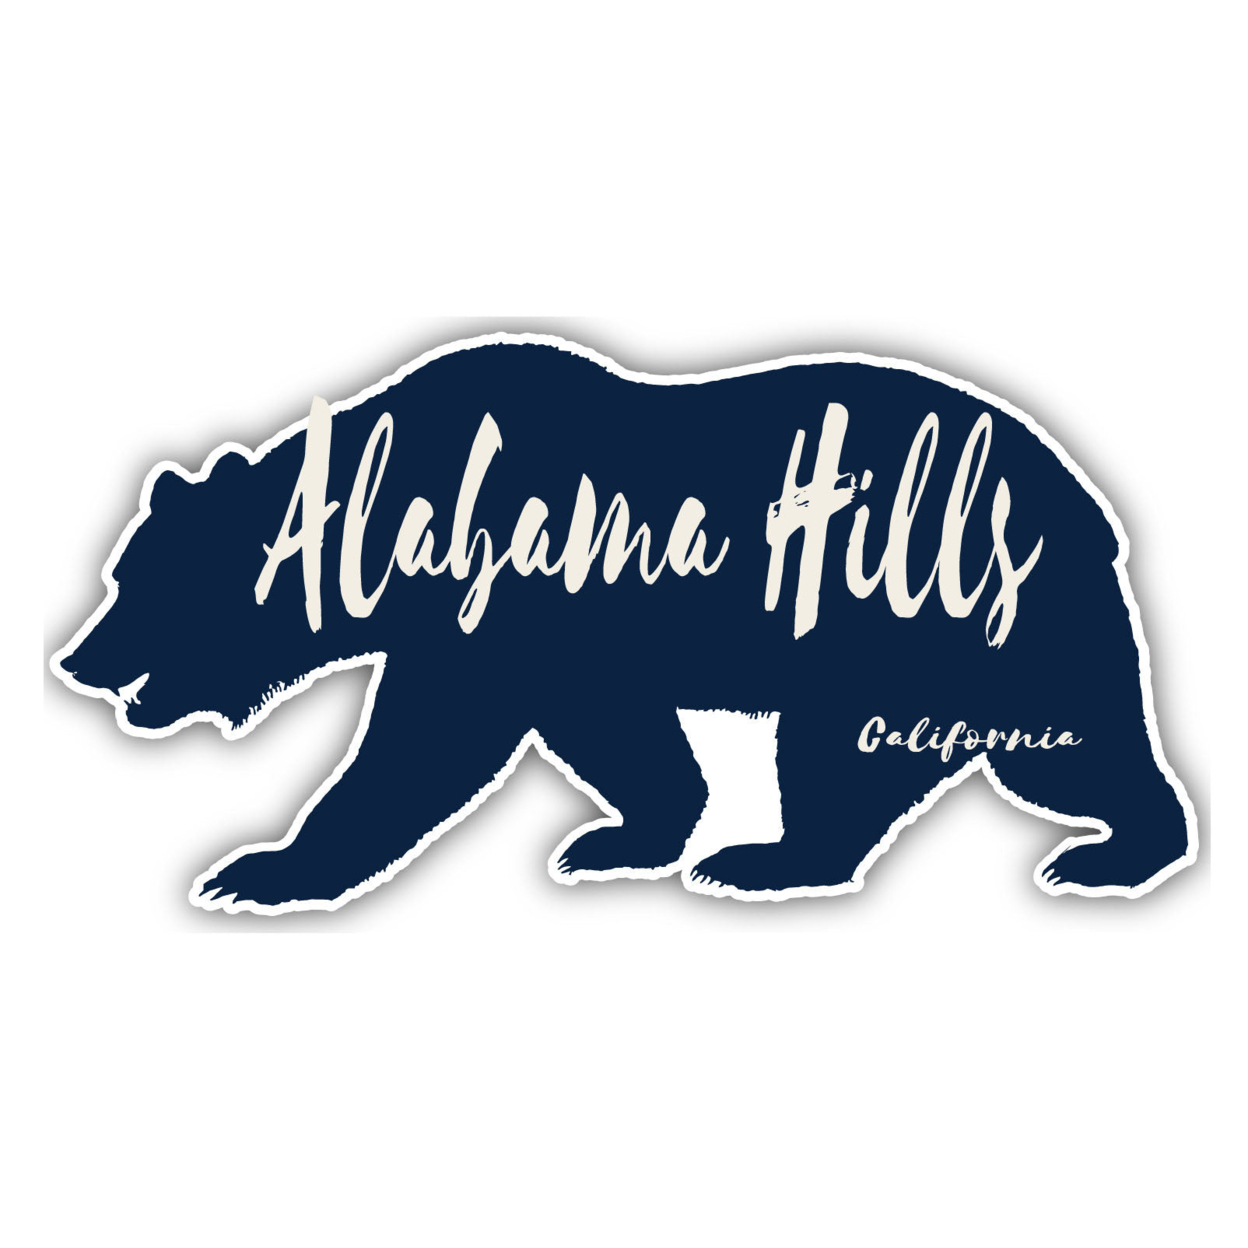 Alabama Hills California Souvenir Decorative Stickers (Choose Theme And Size) - 4-Pack, 12-Inch, Great Outdoors